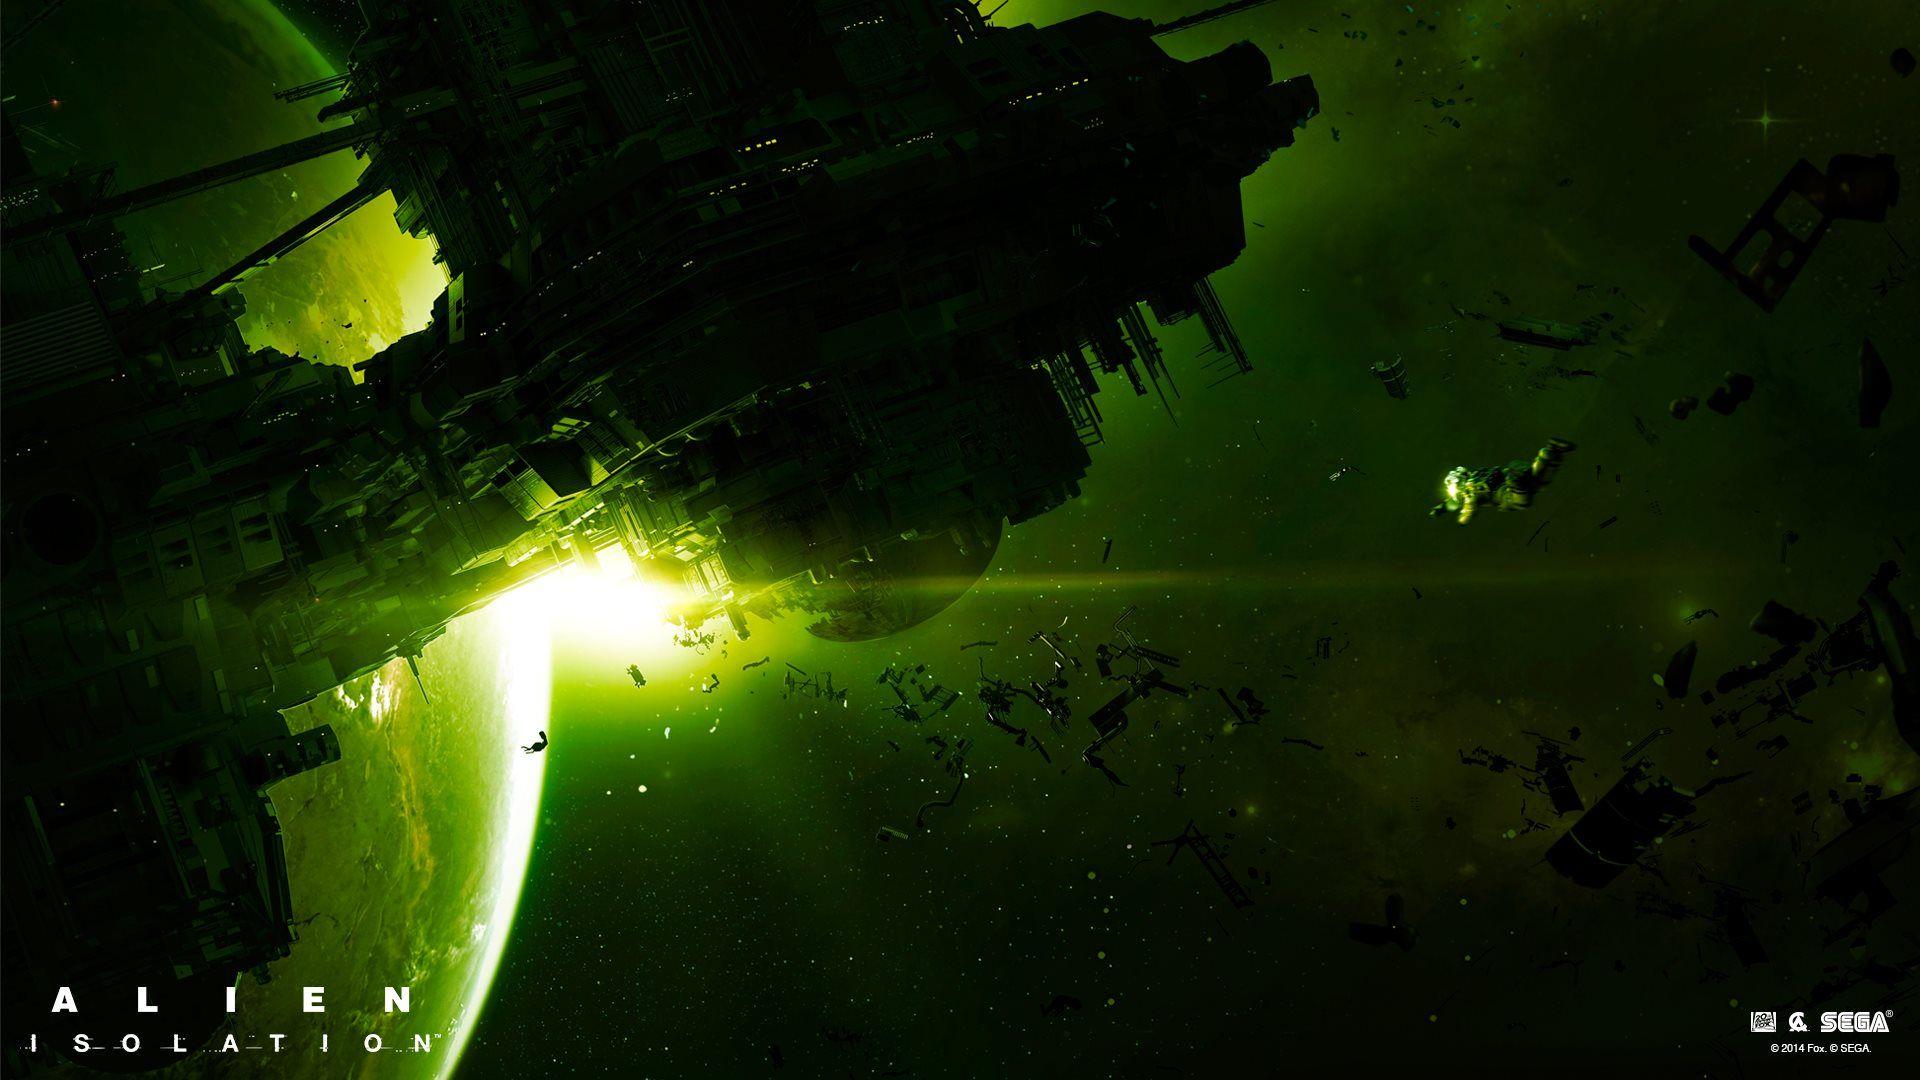 Alien Isolation Wallpaper in HD, 4K and wide sizes